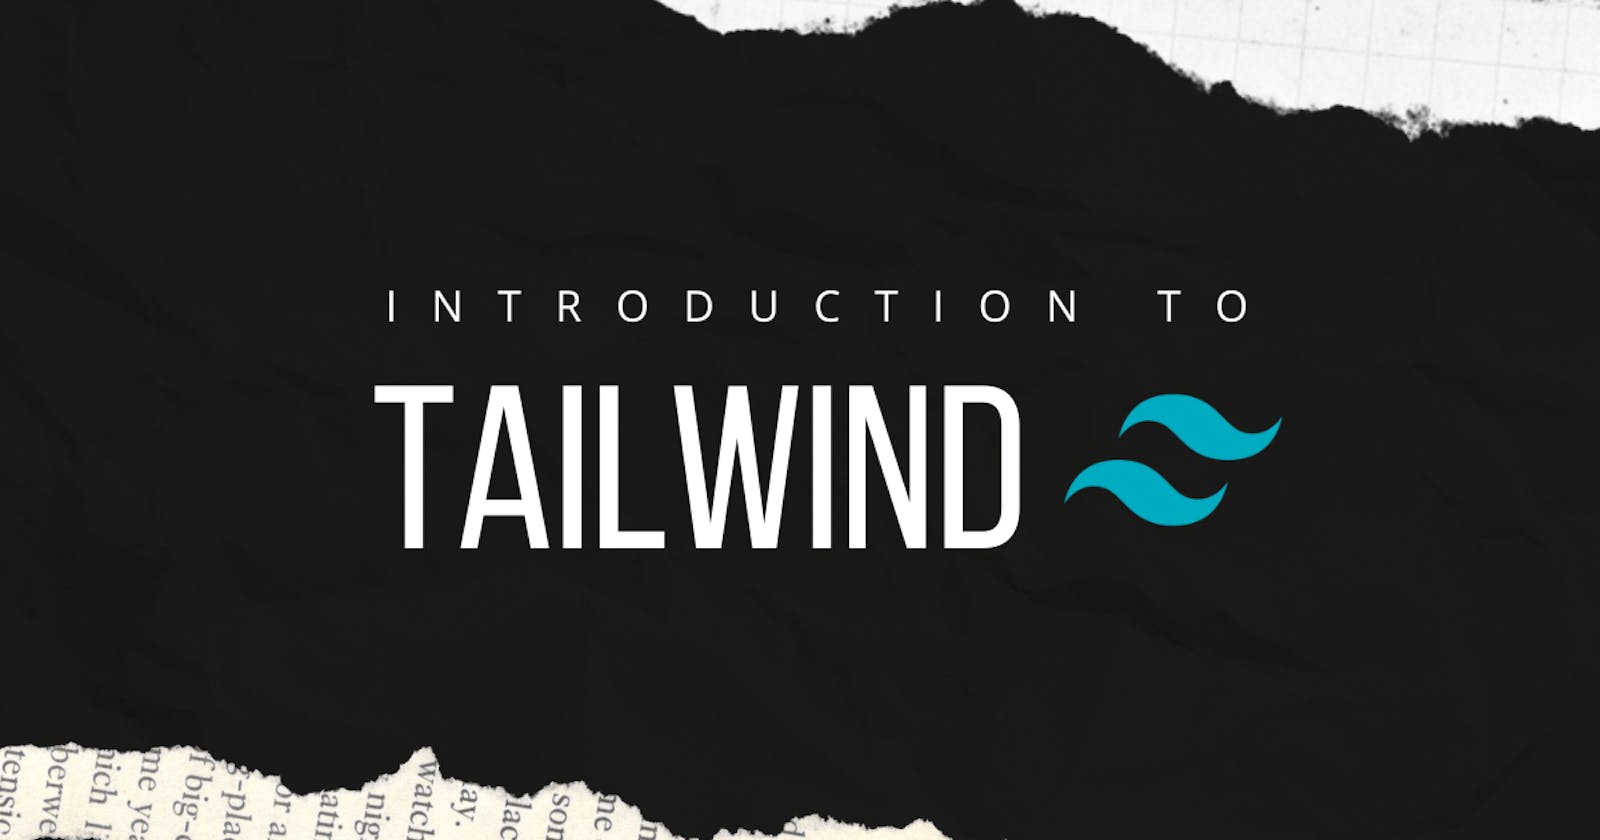 Introduction to Tailwind